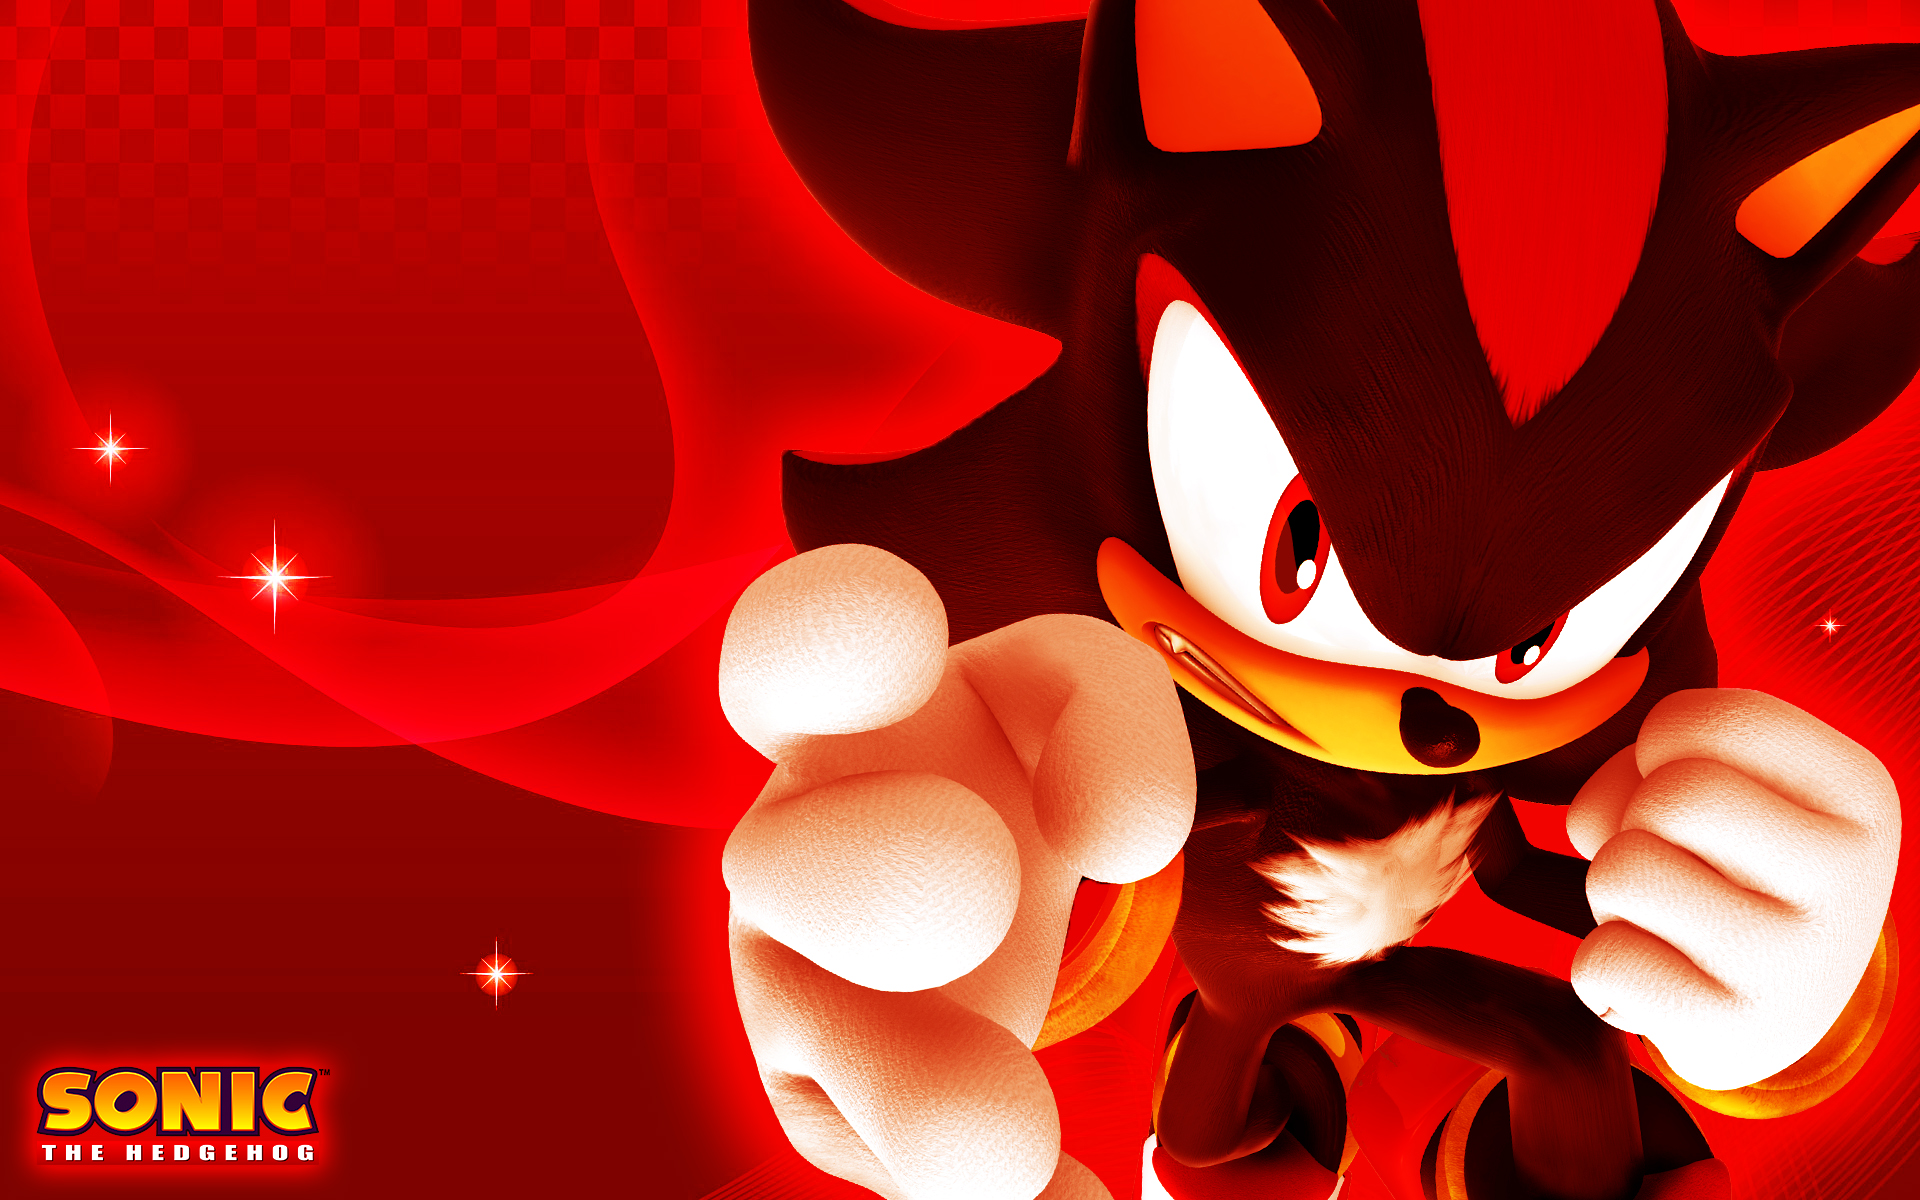 Super Shadow Wallpapers